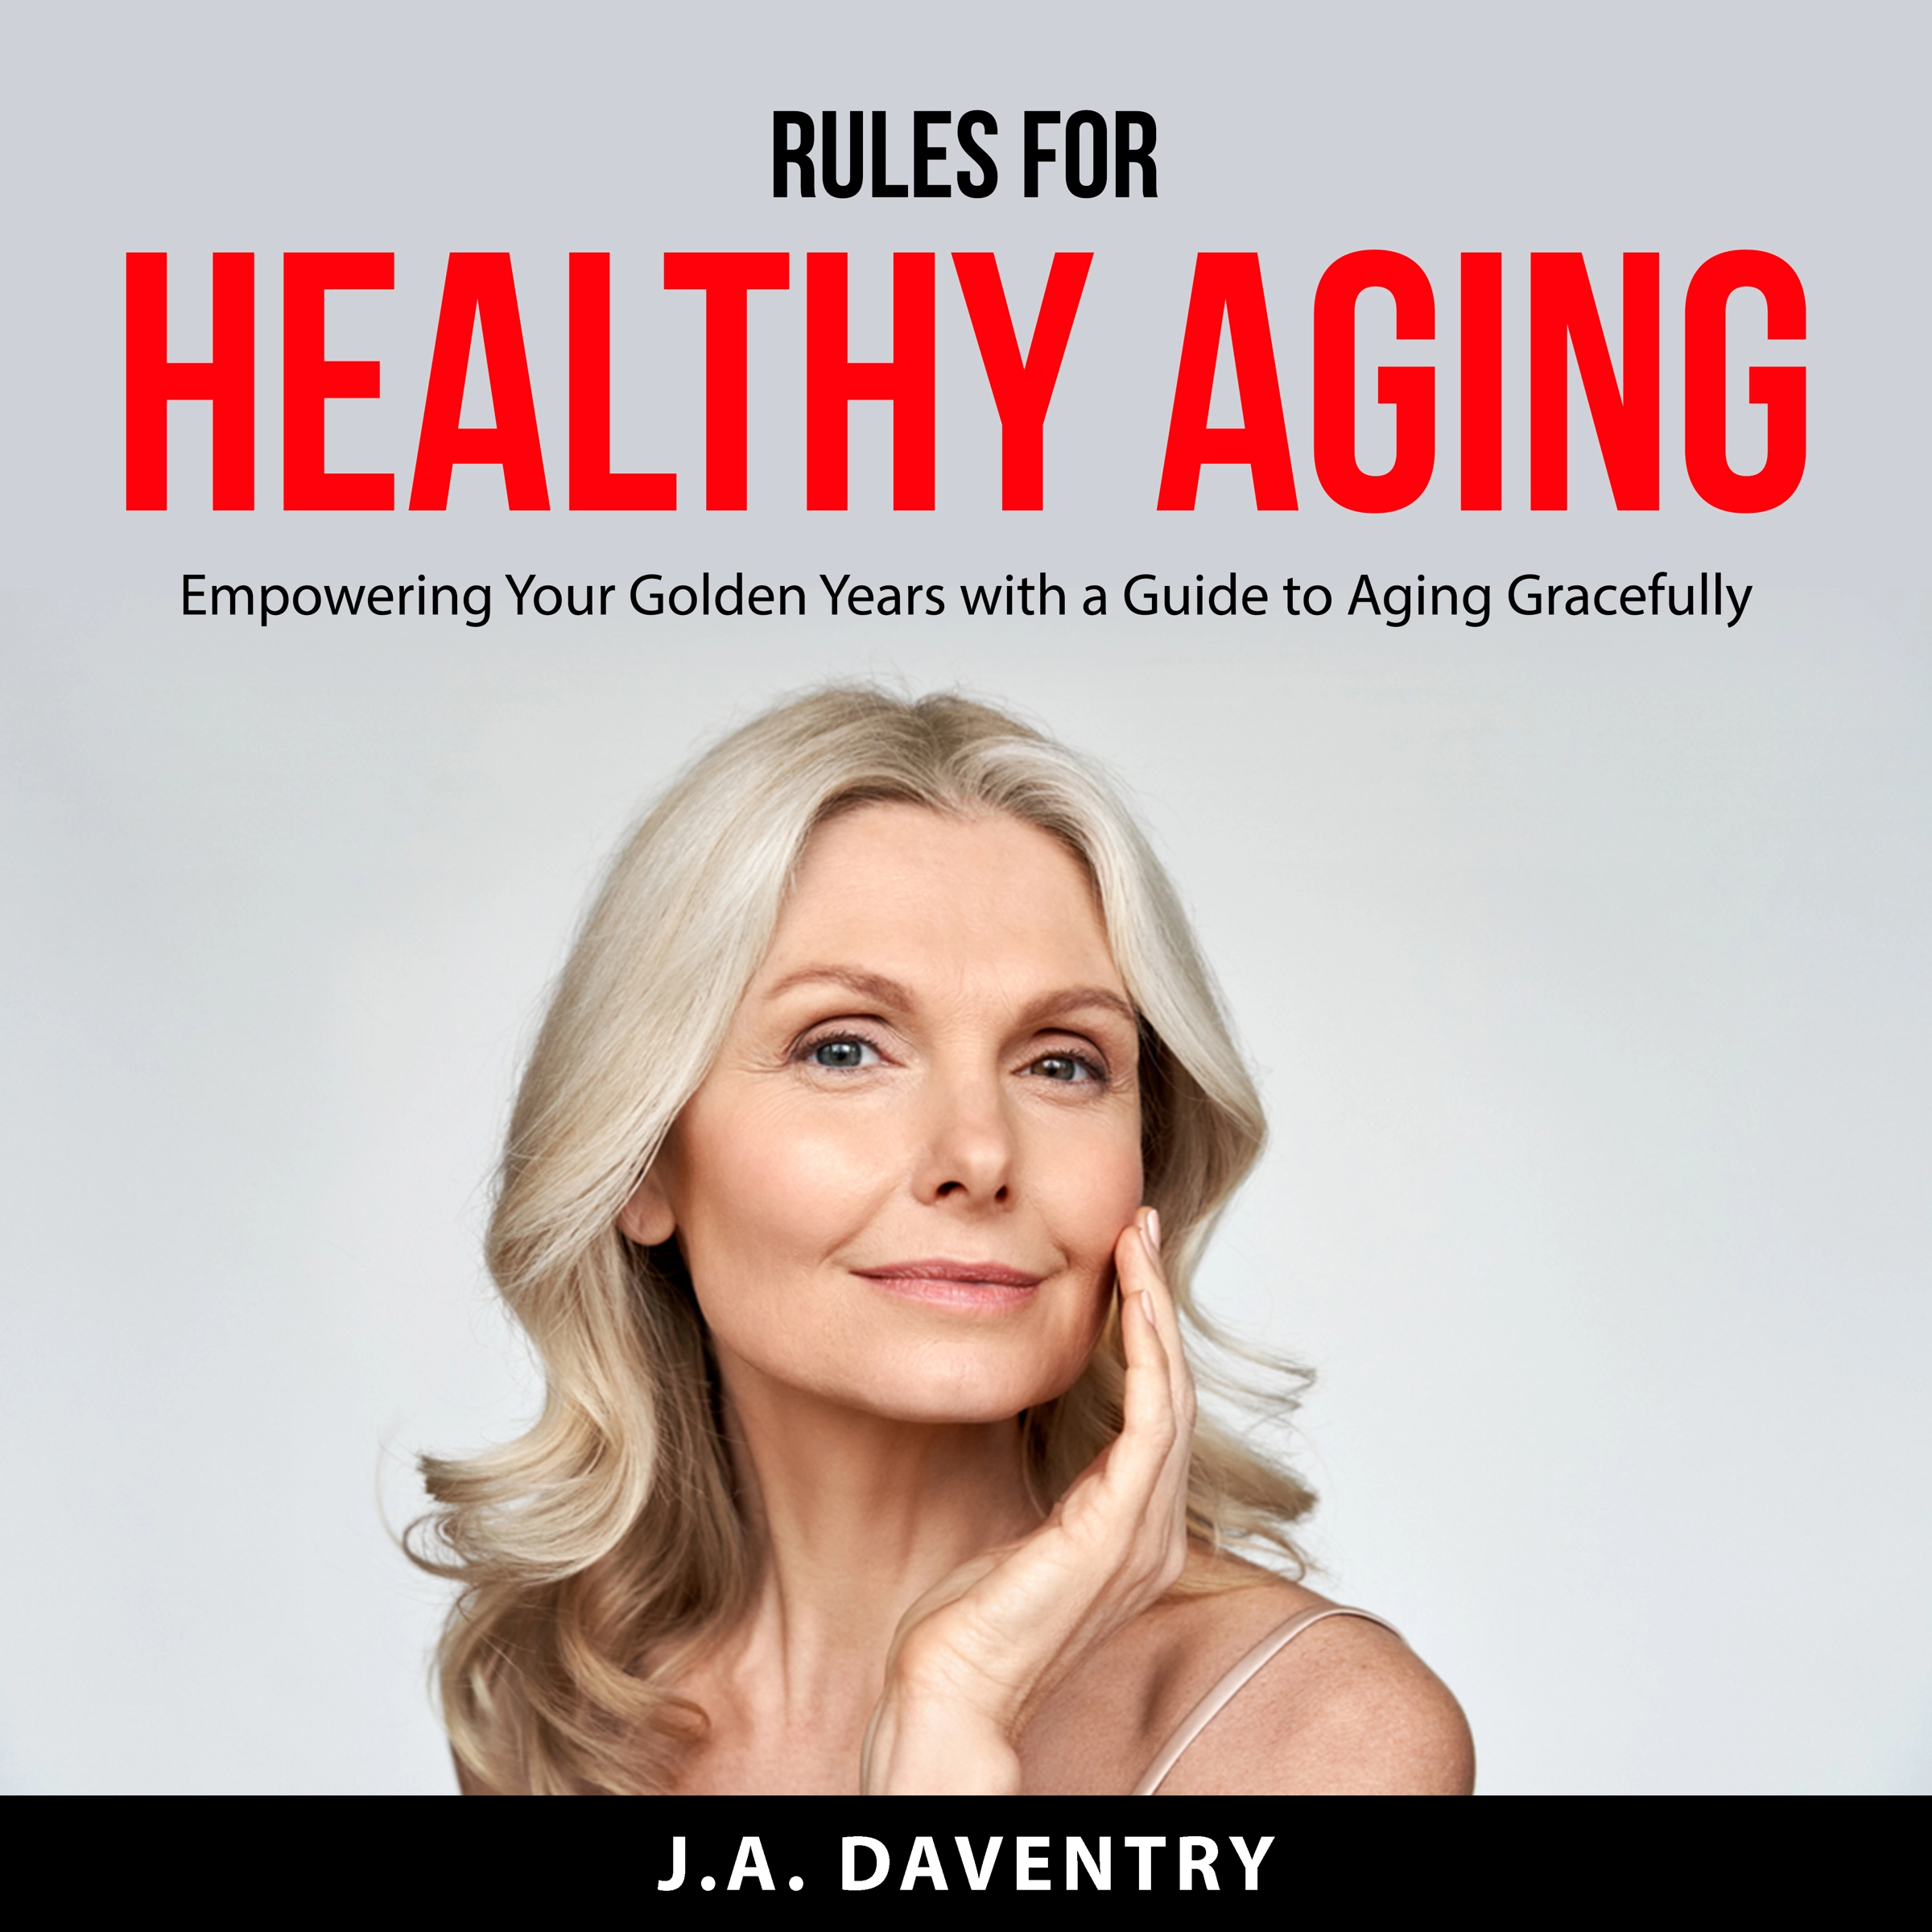 Rules for Healthy Aging Audiobook by J.A. Daventry